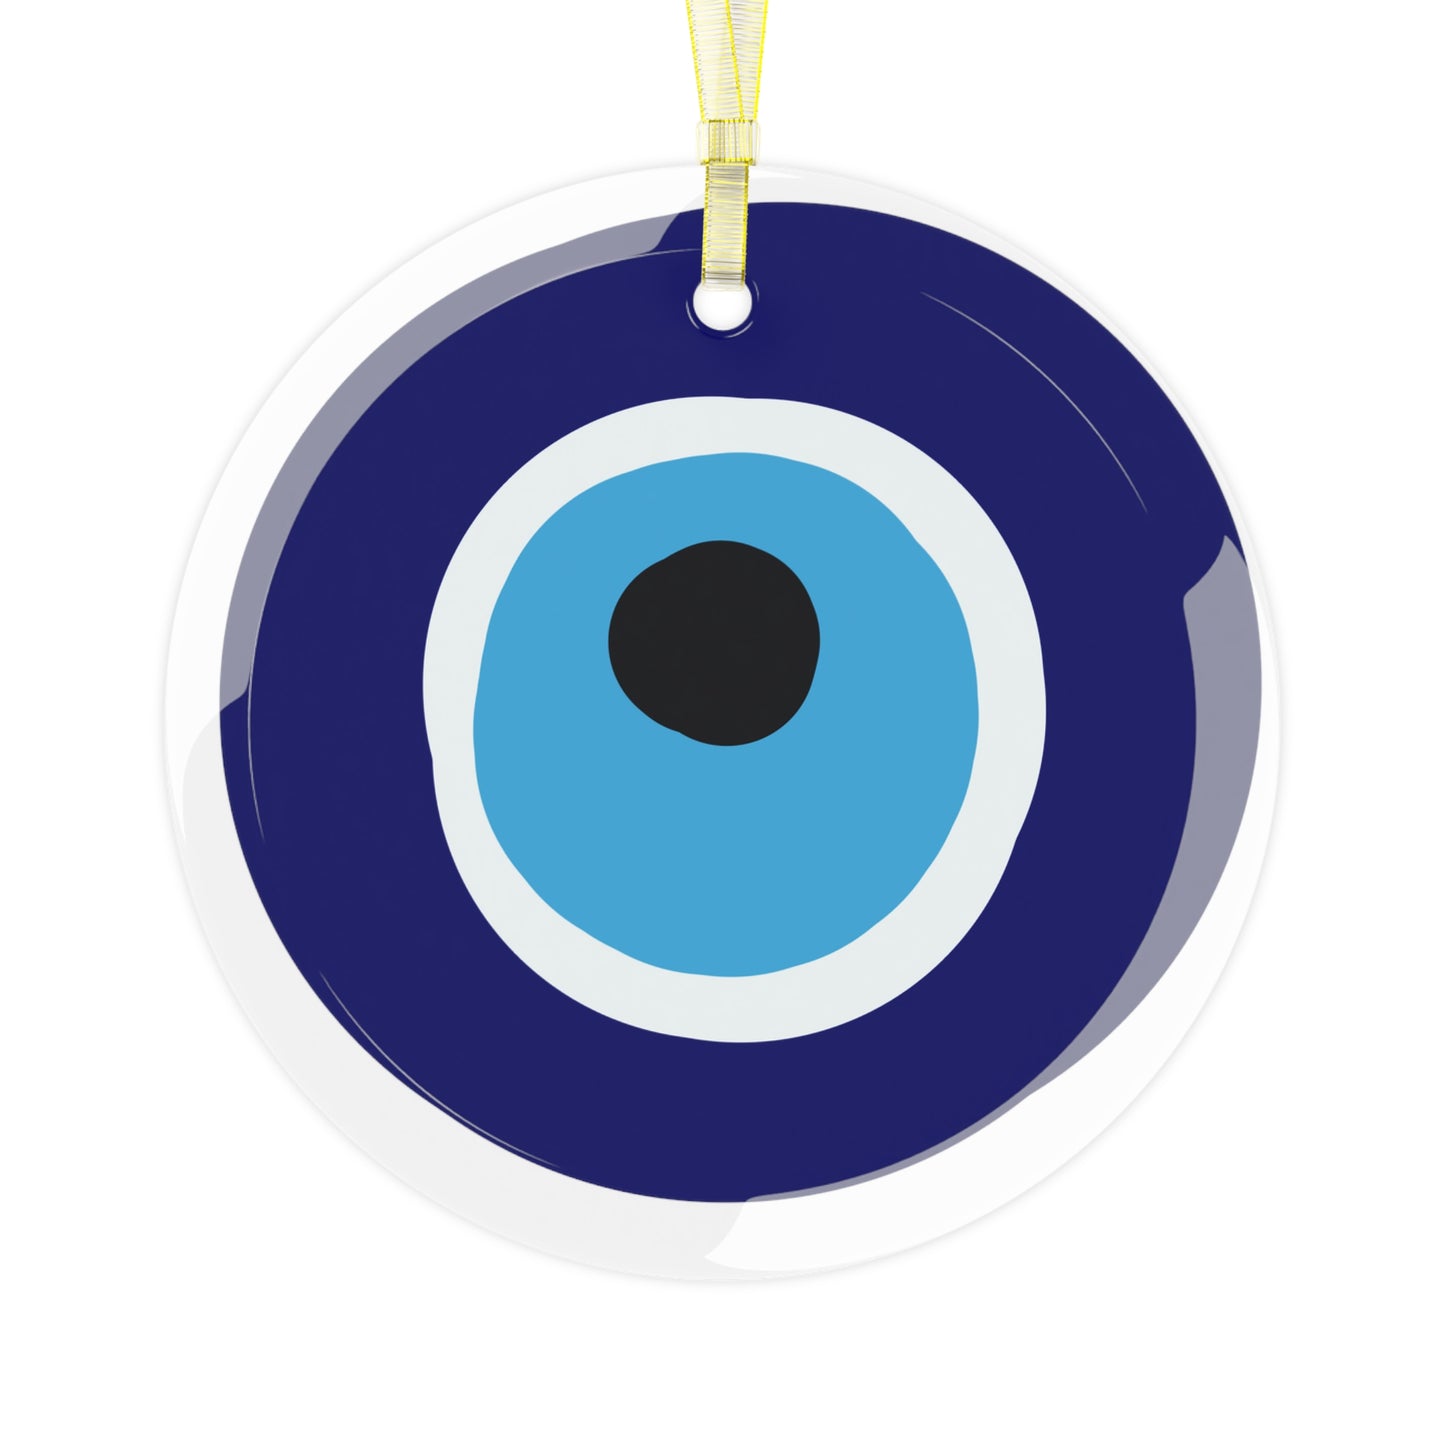 Evil Eye Yule Ornament | Christmas Ornament | Occult Witchy Decor